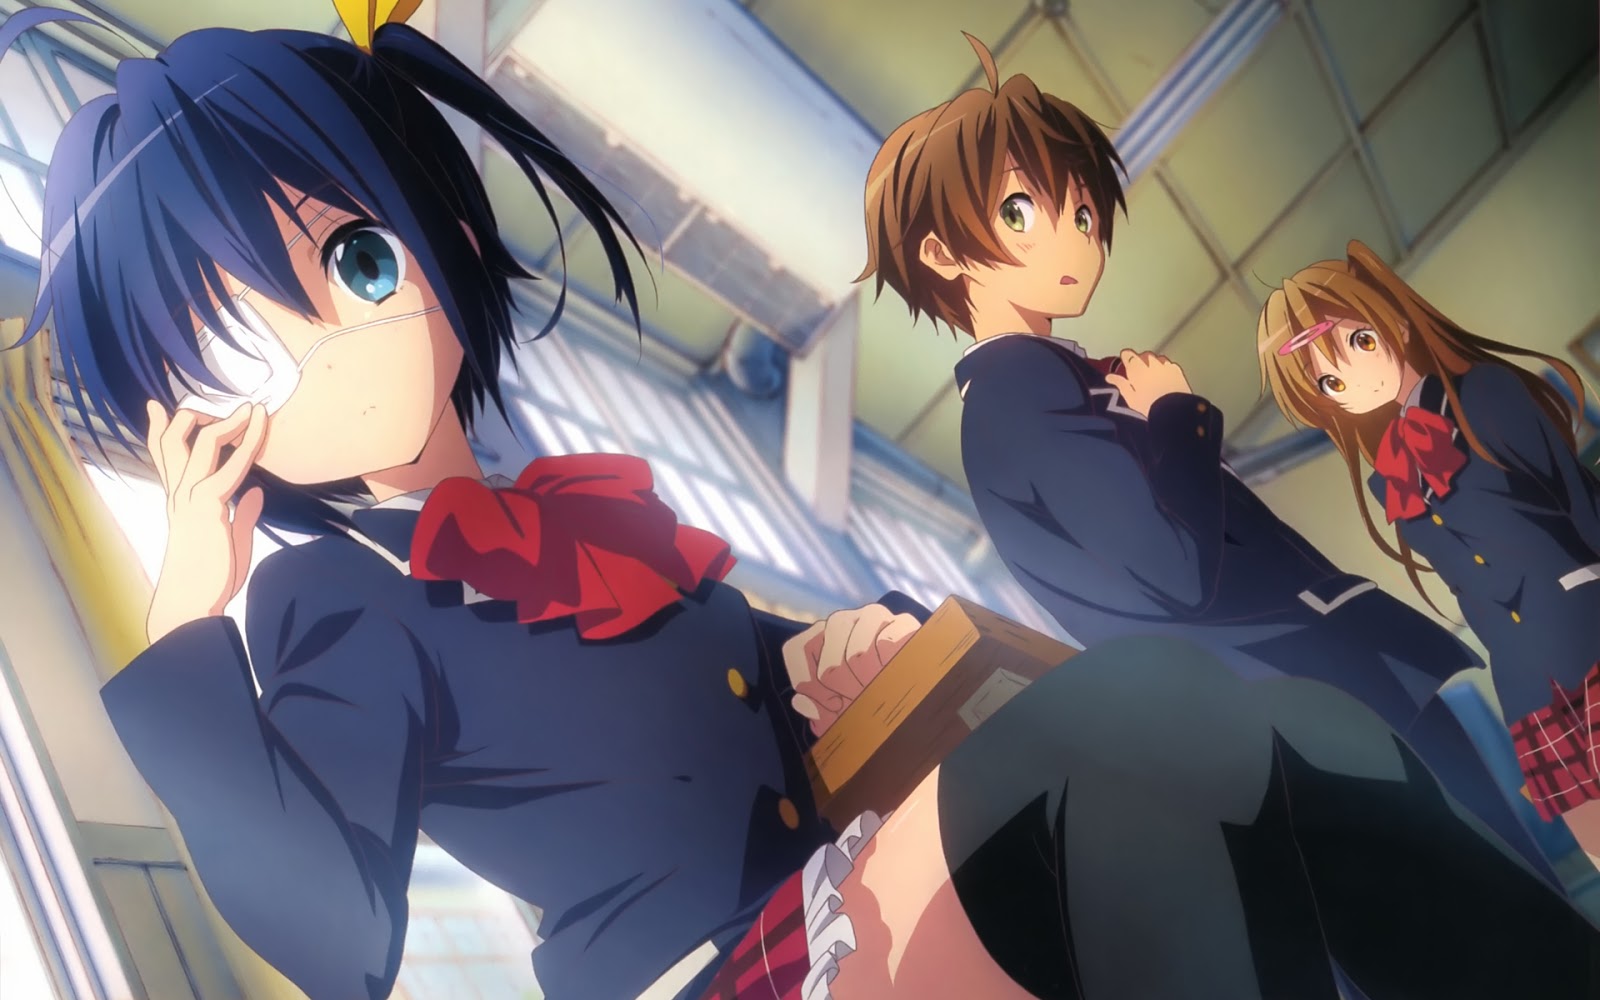 Love, Chunibyo & Other Delusions - wide 8